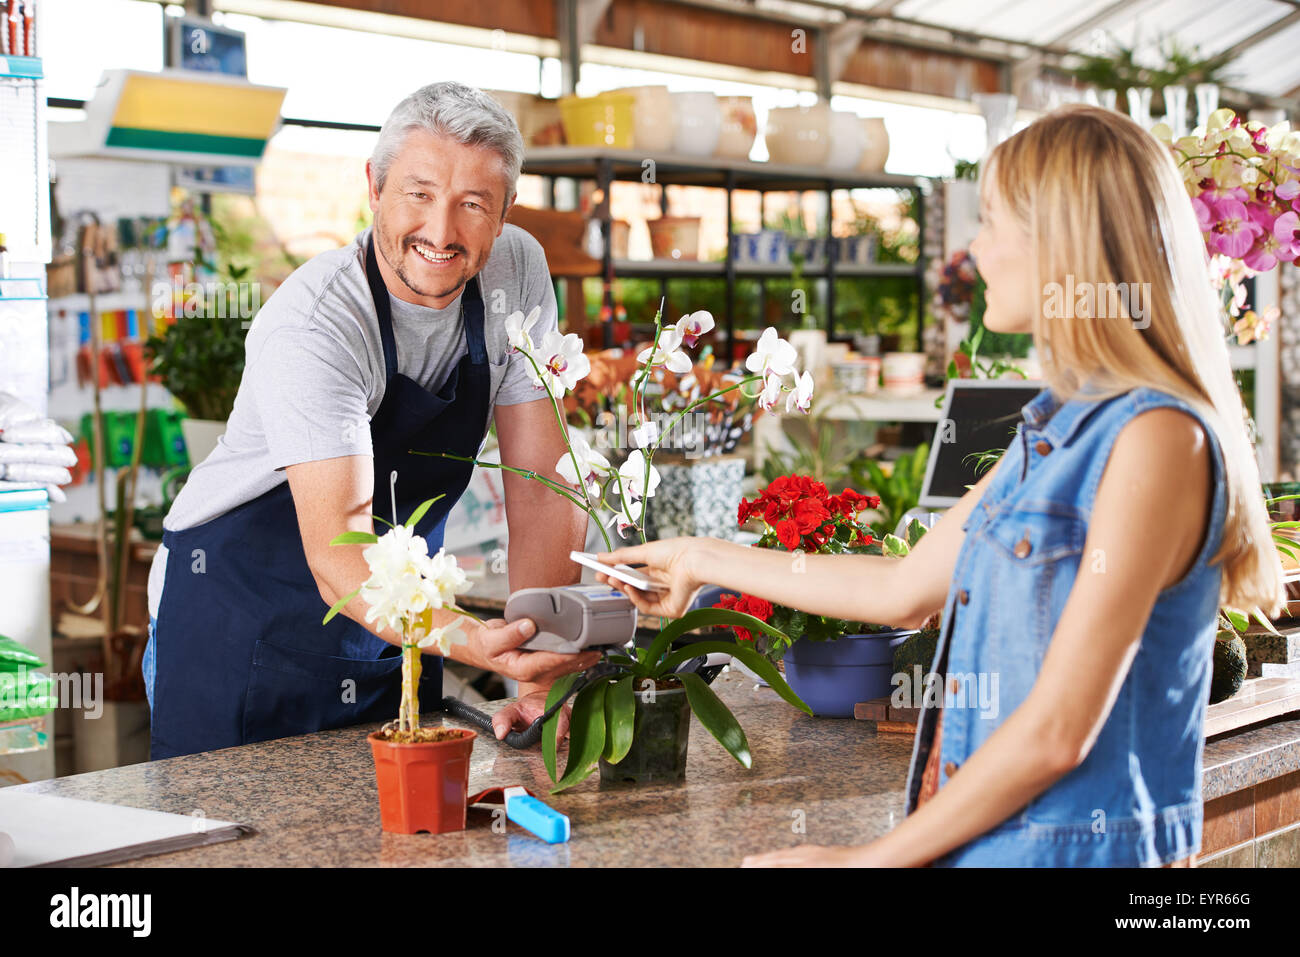 Mobile payment in garden center with salesman and customer Stock Photo